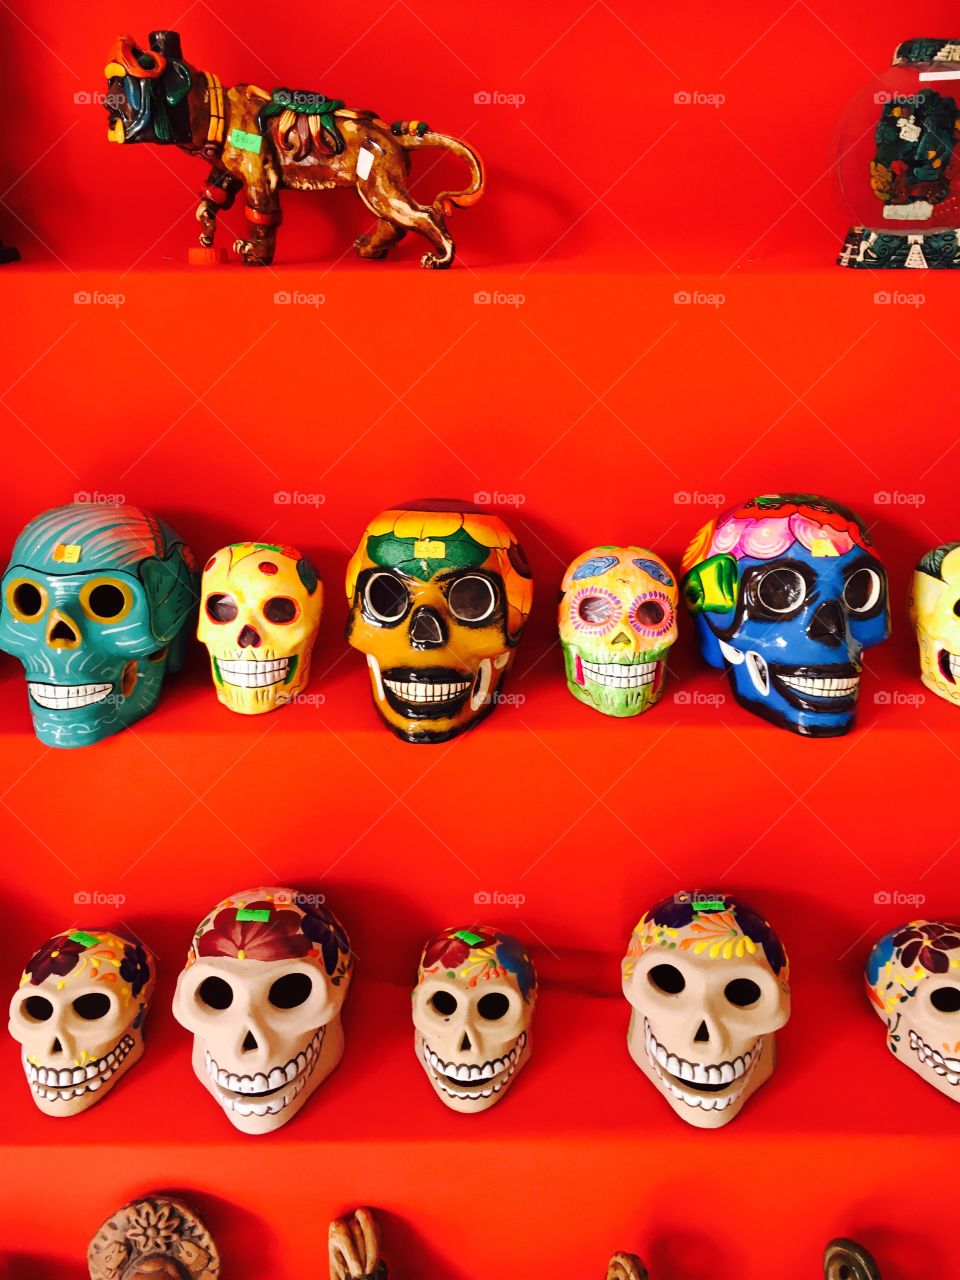 Day of the dead masks, Mexico 